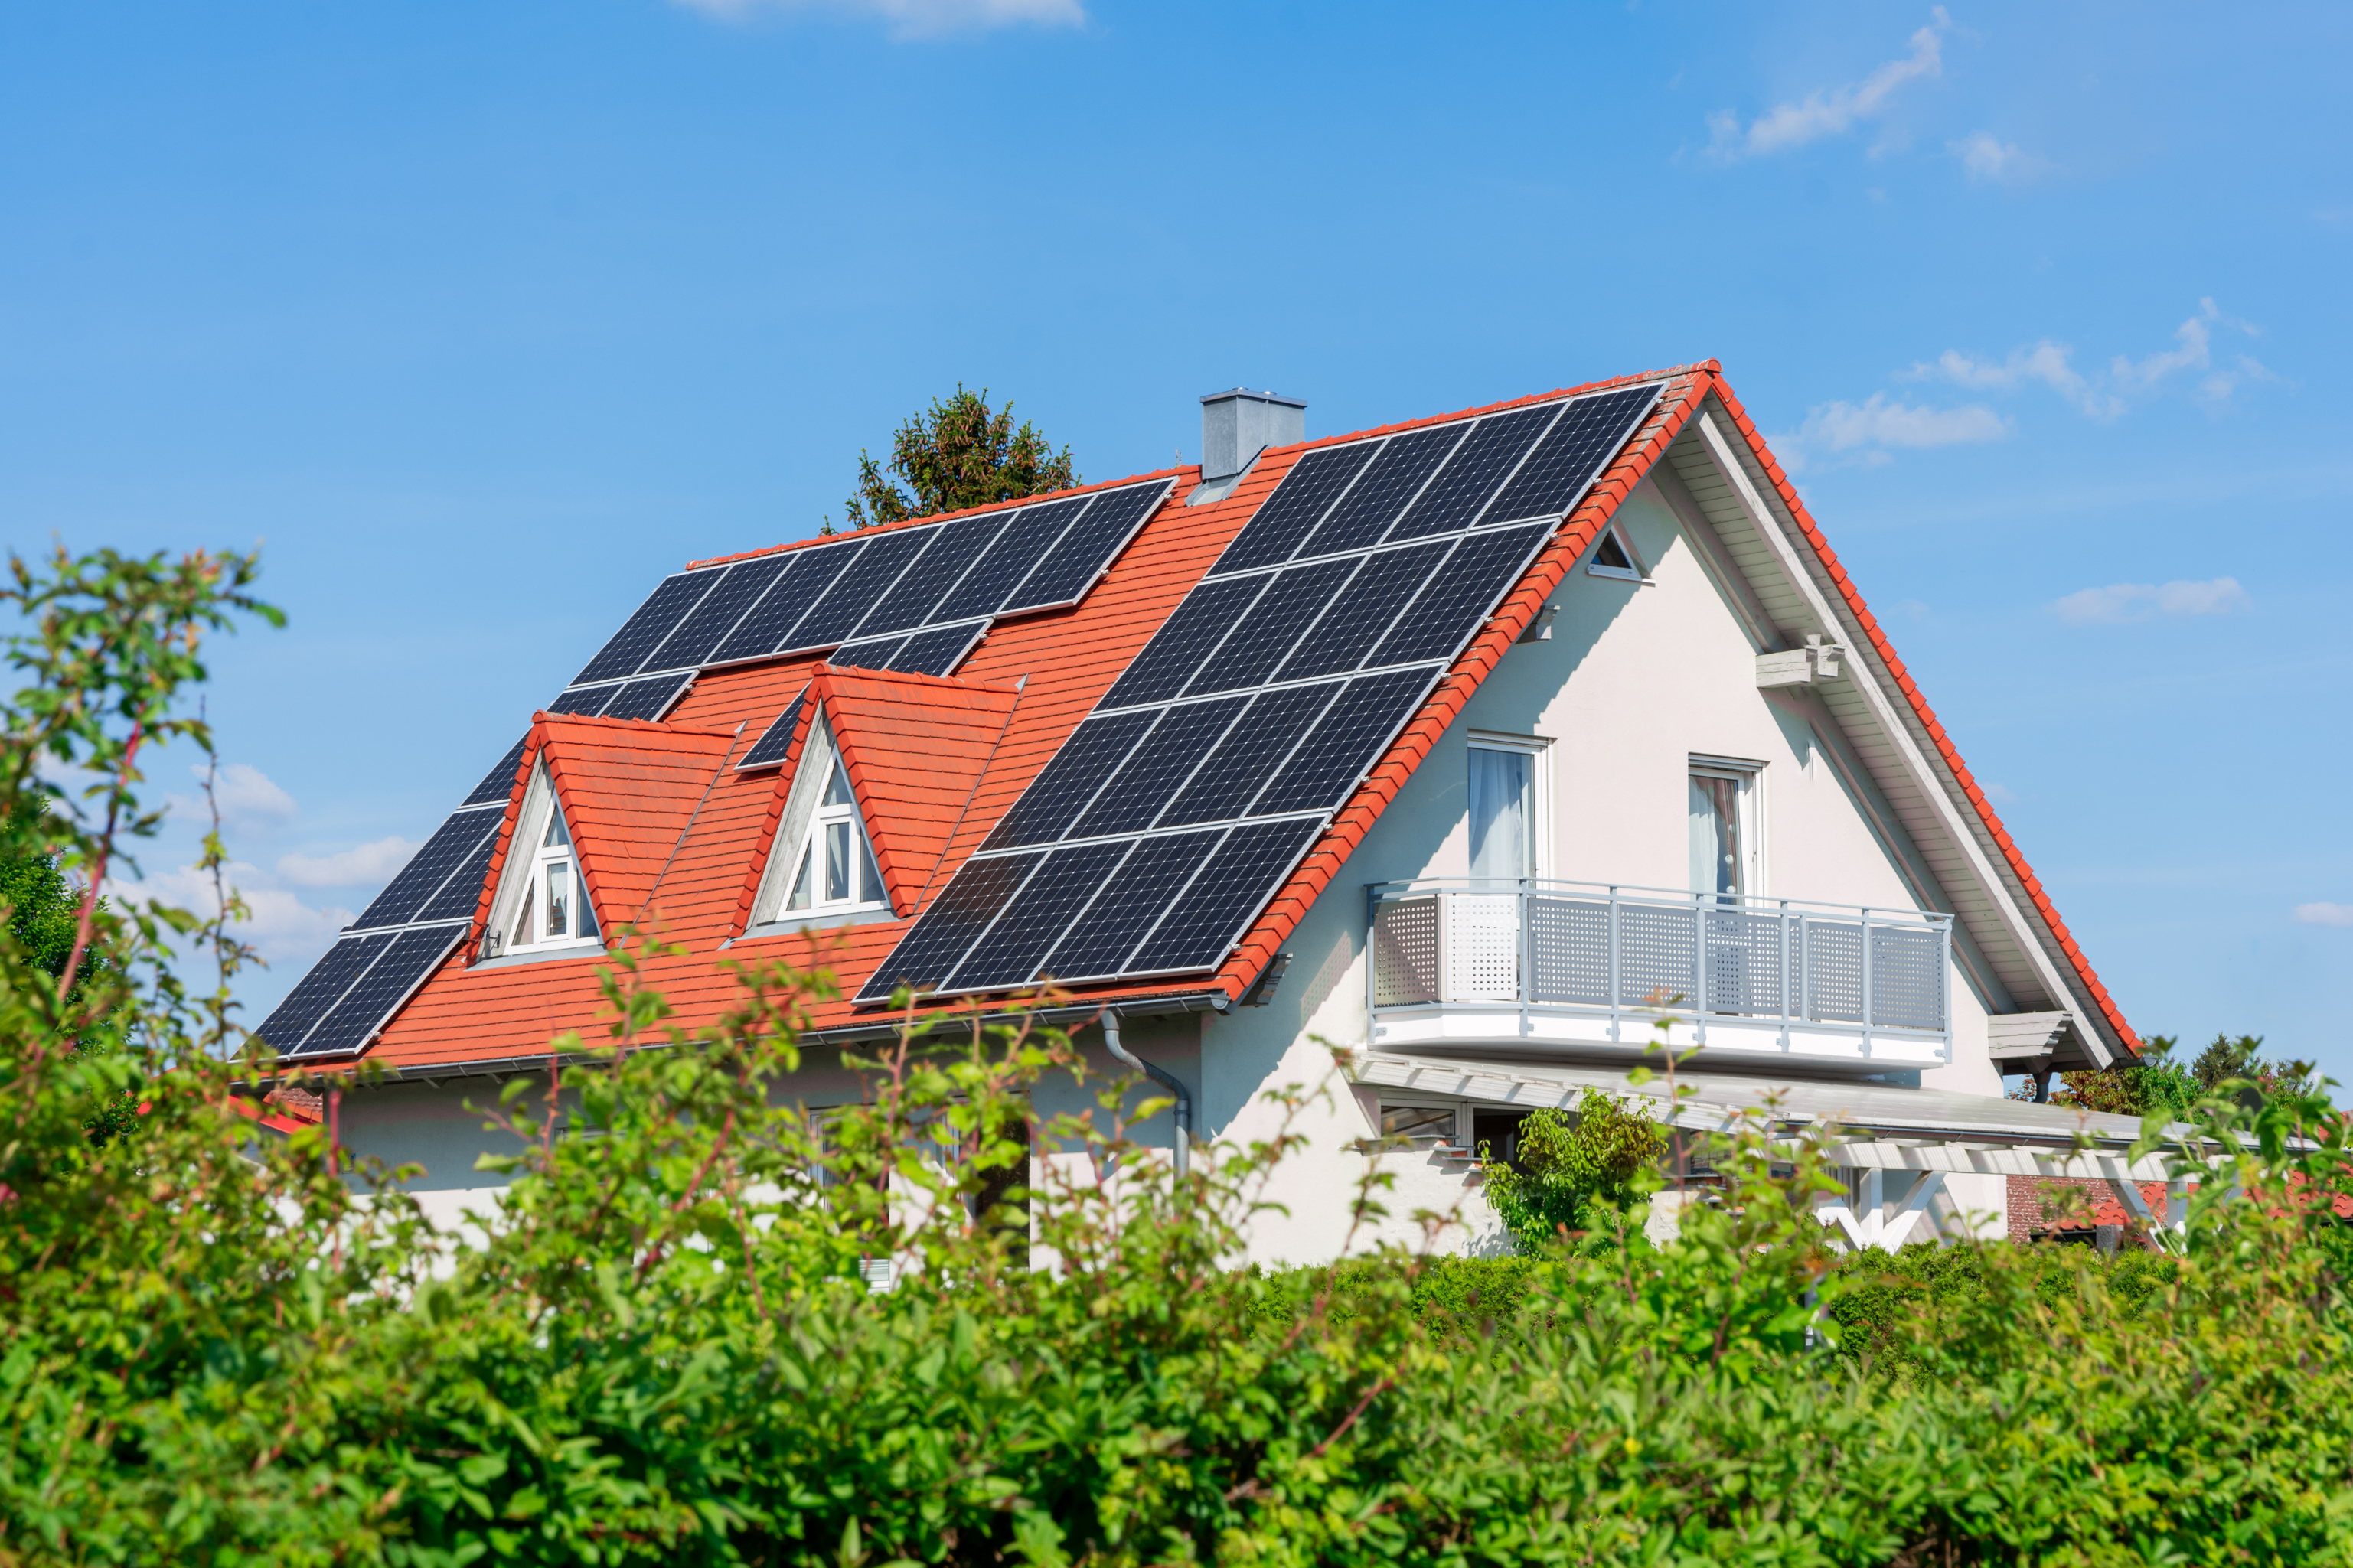 Read: Texas Summers and Solar PV Systems